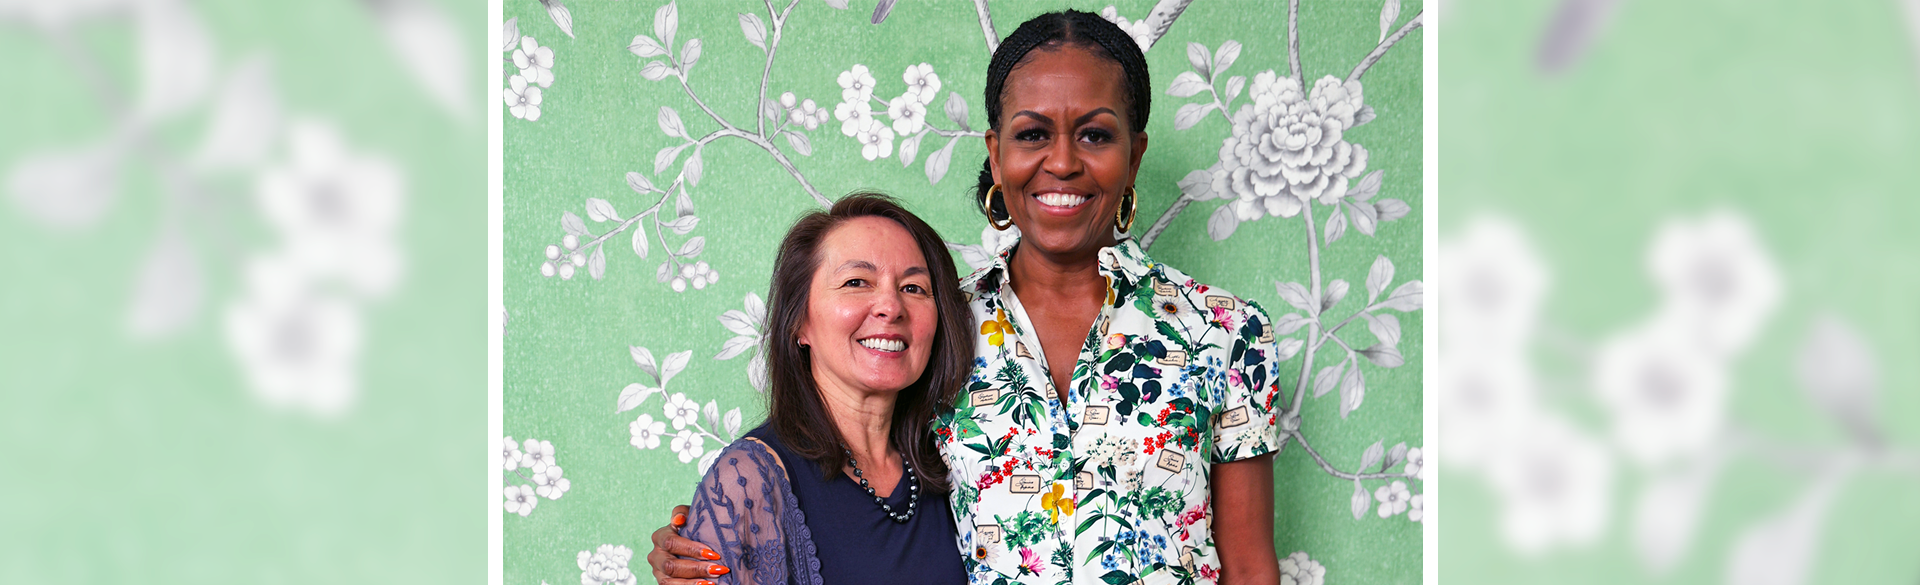 Shale Wong and Michelle Obama | CU School of Medicine